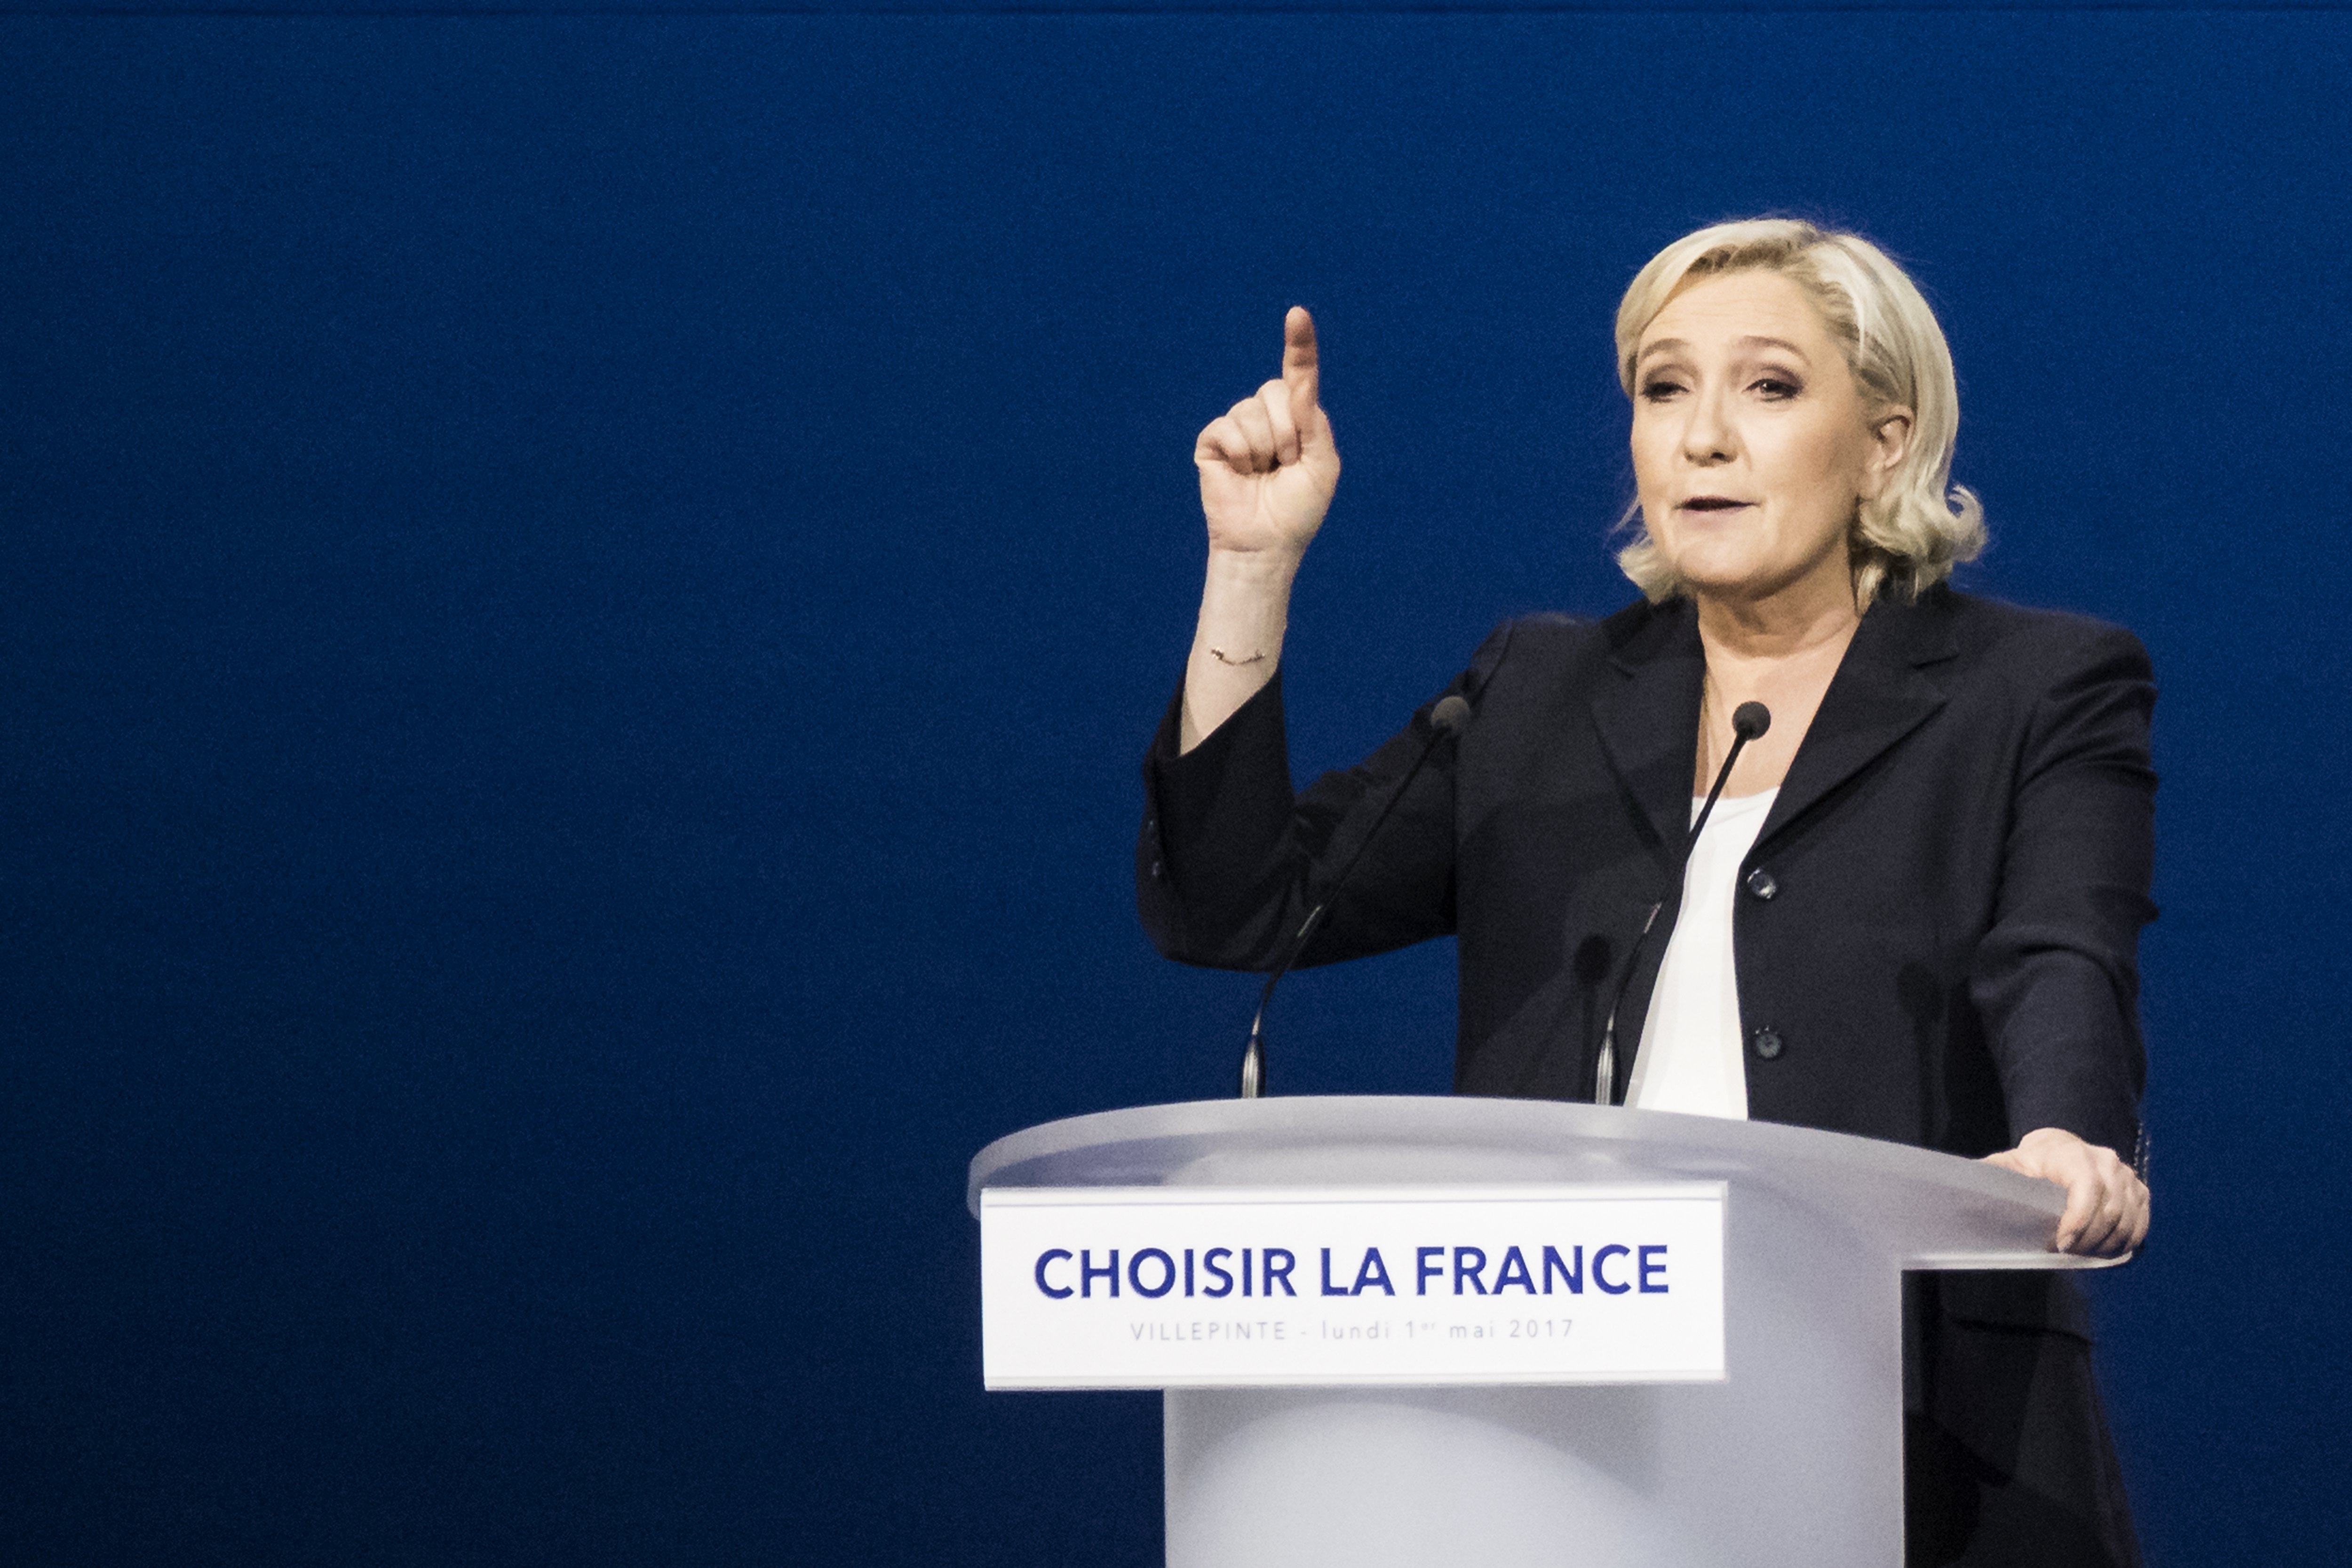 2017-05-01 09:58:08 epa05938716 Far-right Front National (FN) party candidate Marine Le-Pen delivers a speech during a meeting in Villepinte, north of Paris, France, 01 May 2017. Far-right Front National (FN) party candidate Marine Le-Pen and 'En Marche!' (Onwards!) party candidate Emmanuel Macron arrived in the lead positions in the first round of the presidential elections. France will hold the second round on 07 May 2017. EPA/ETIENNE LAURENT